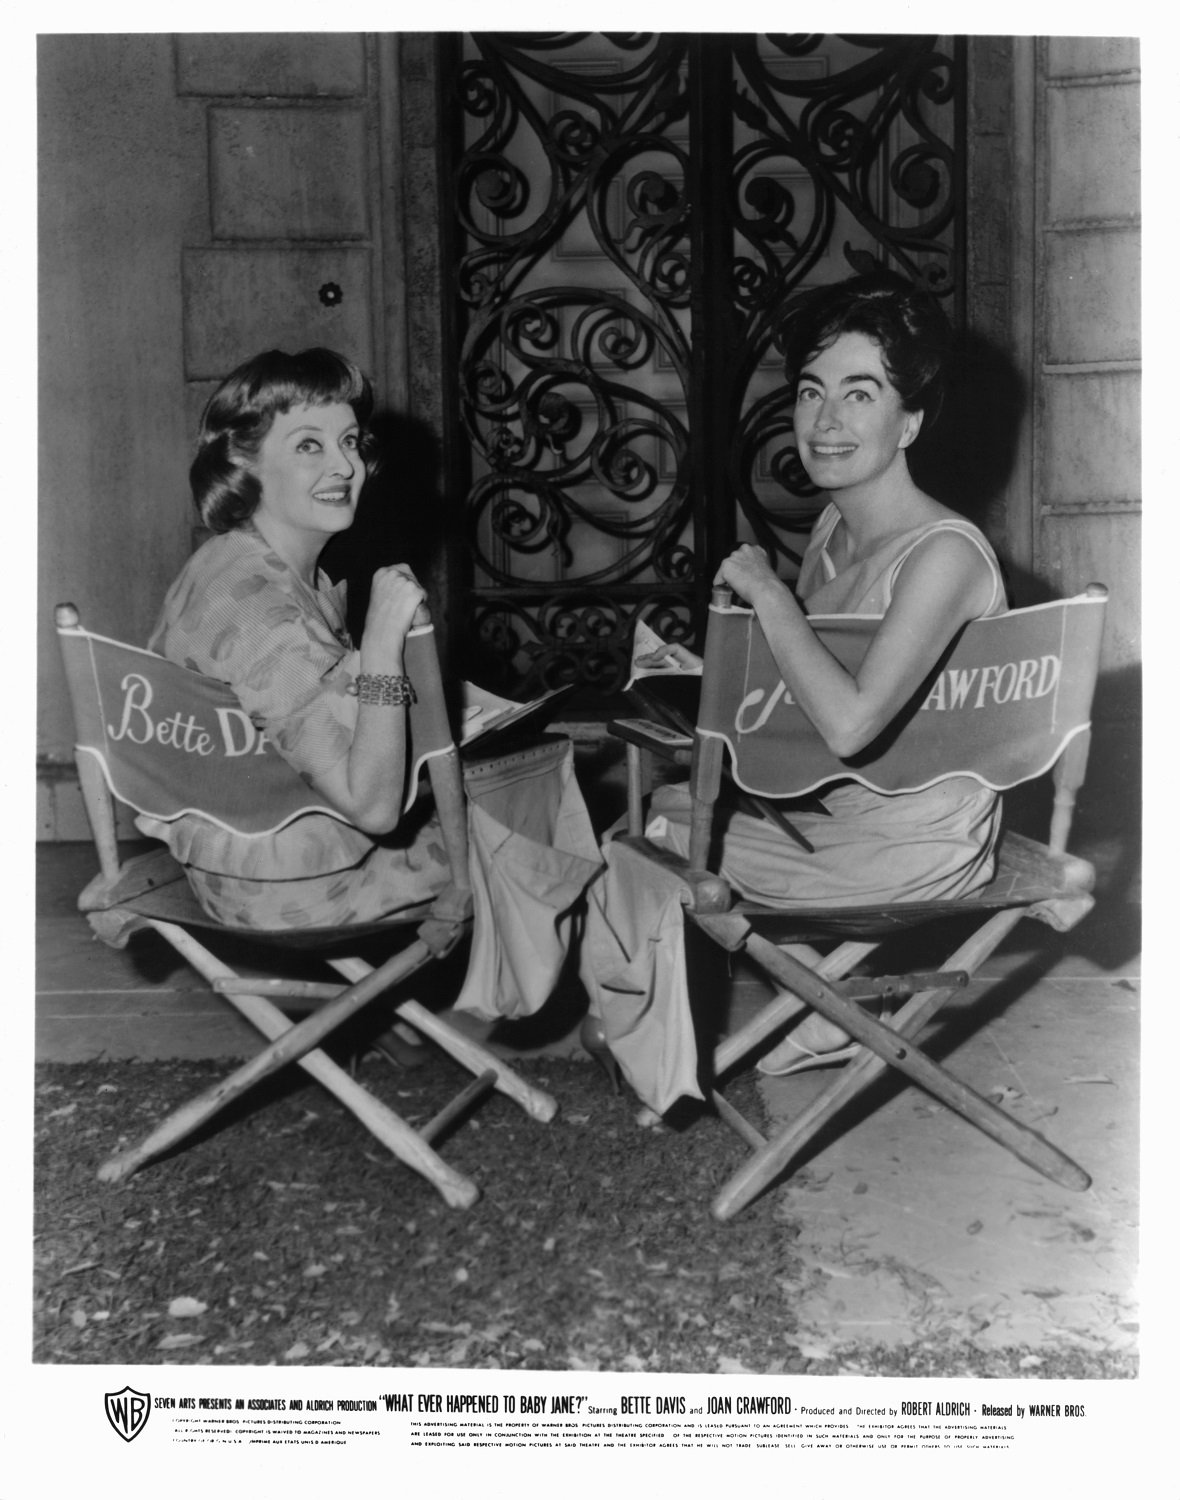 Bette Davis and Joan Crawford in between scenes from the film 'What Ever Happened To Baby Jane?'